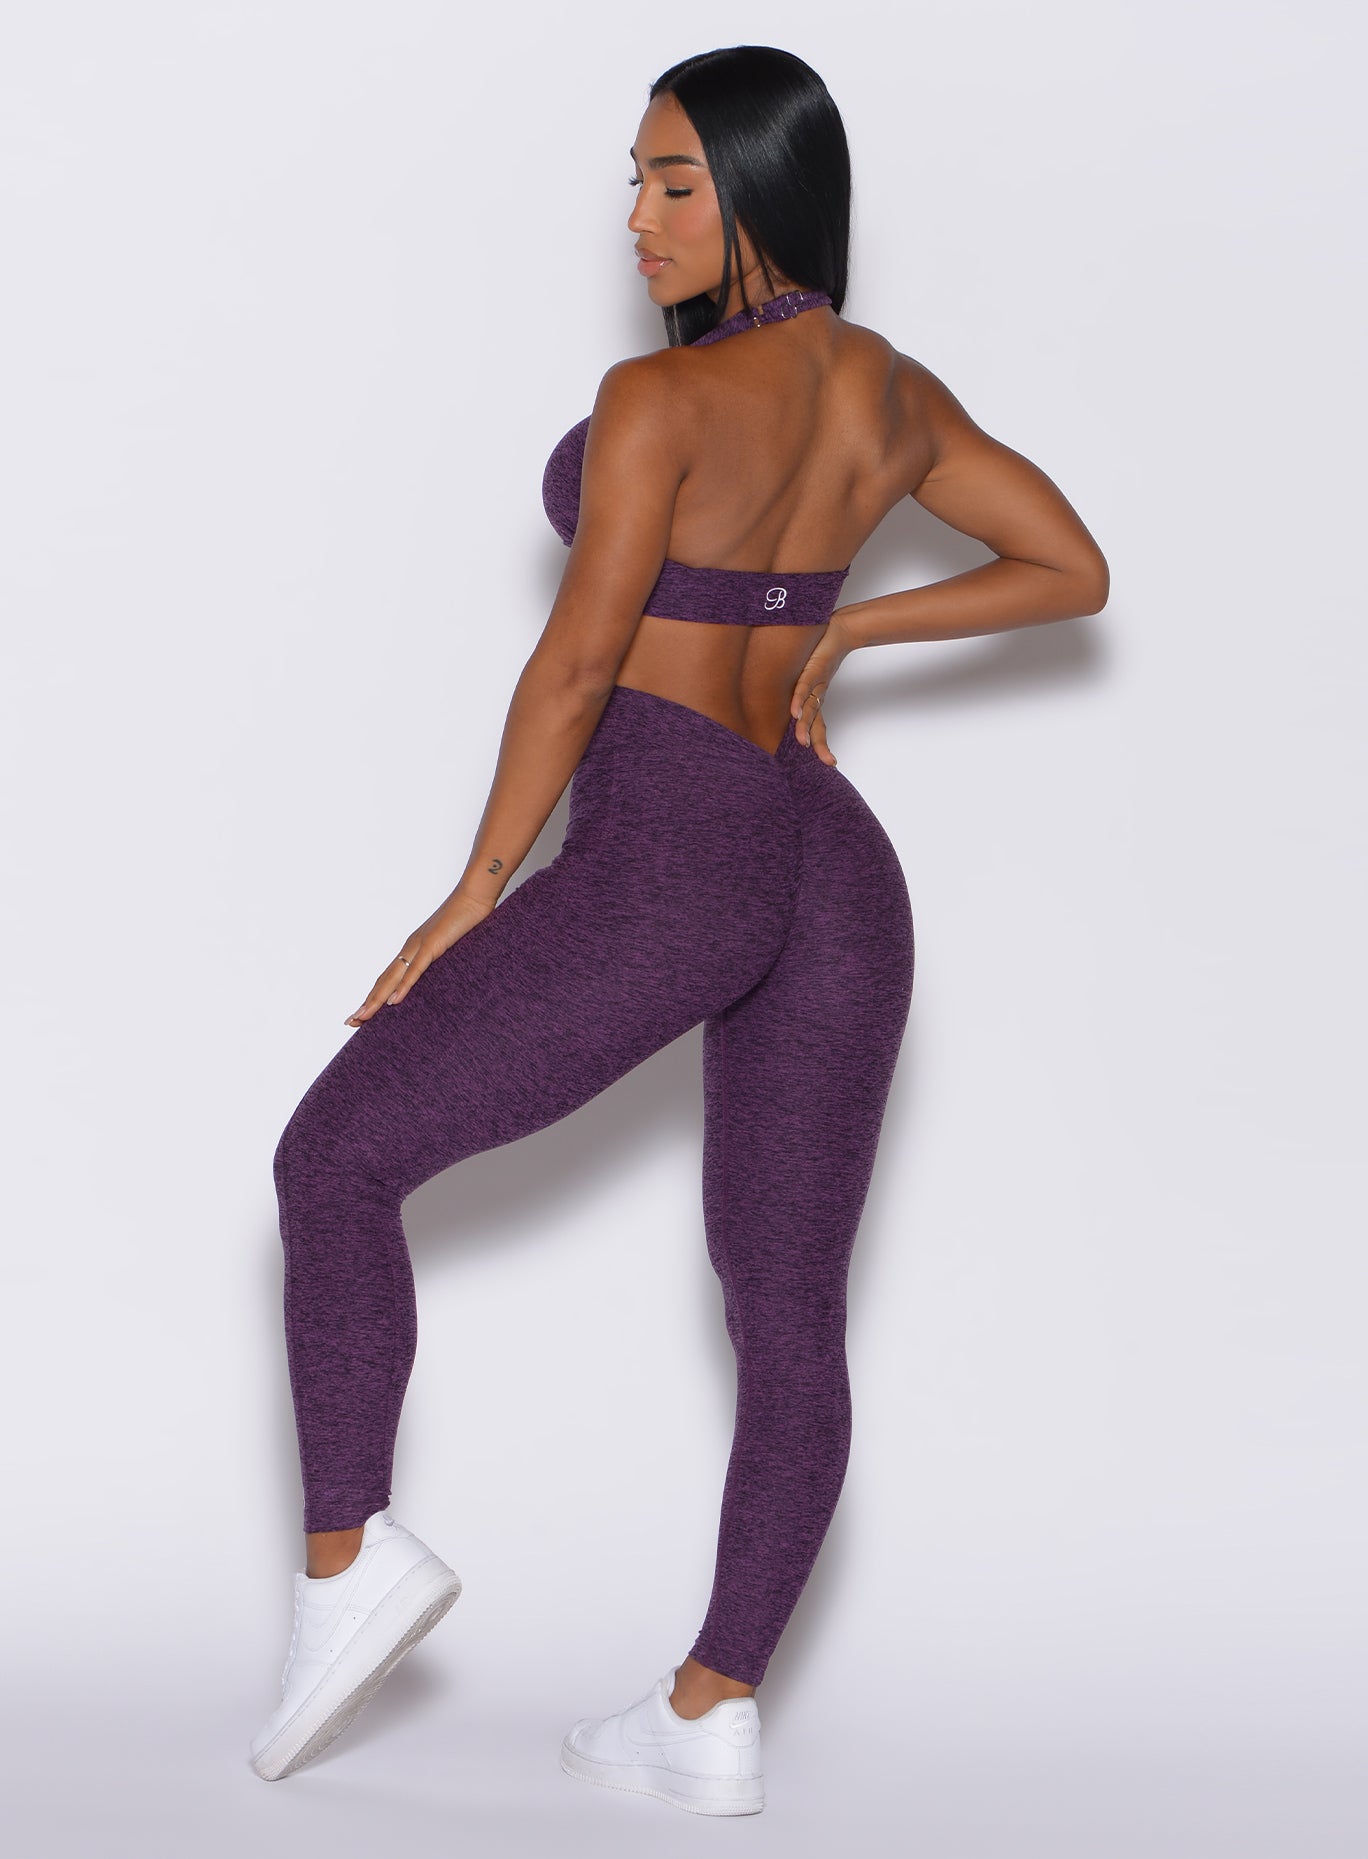 Left side profile view of a model angled slightly to her right wearing our V Back Leggings in purple passion color along with the matching bra